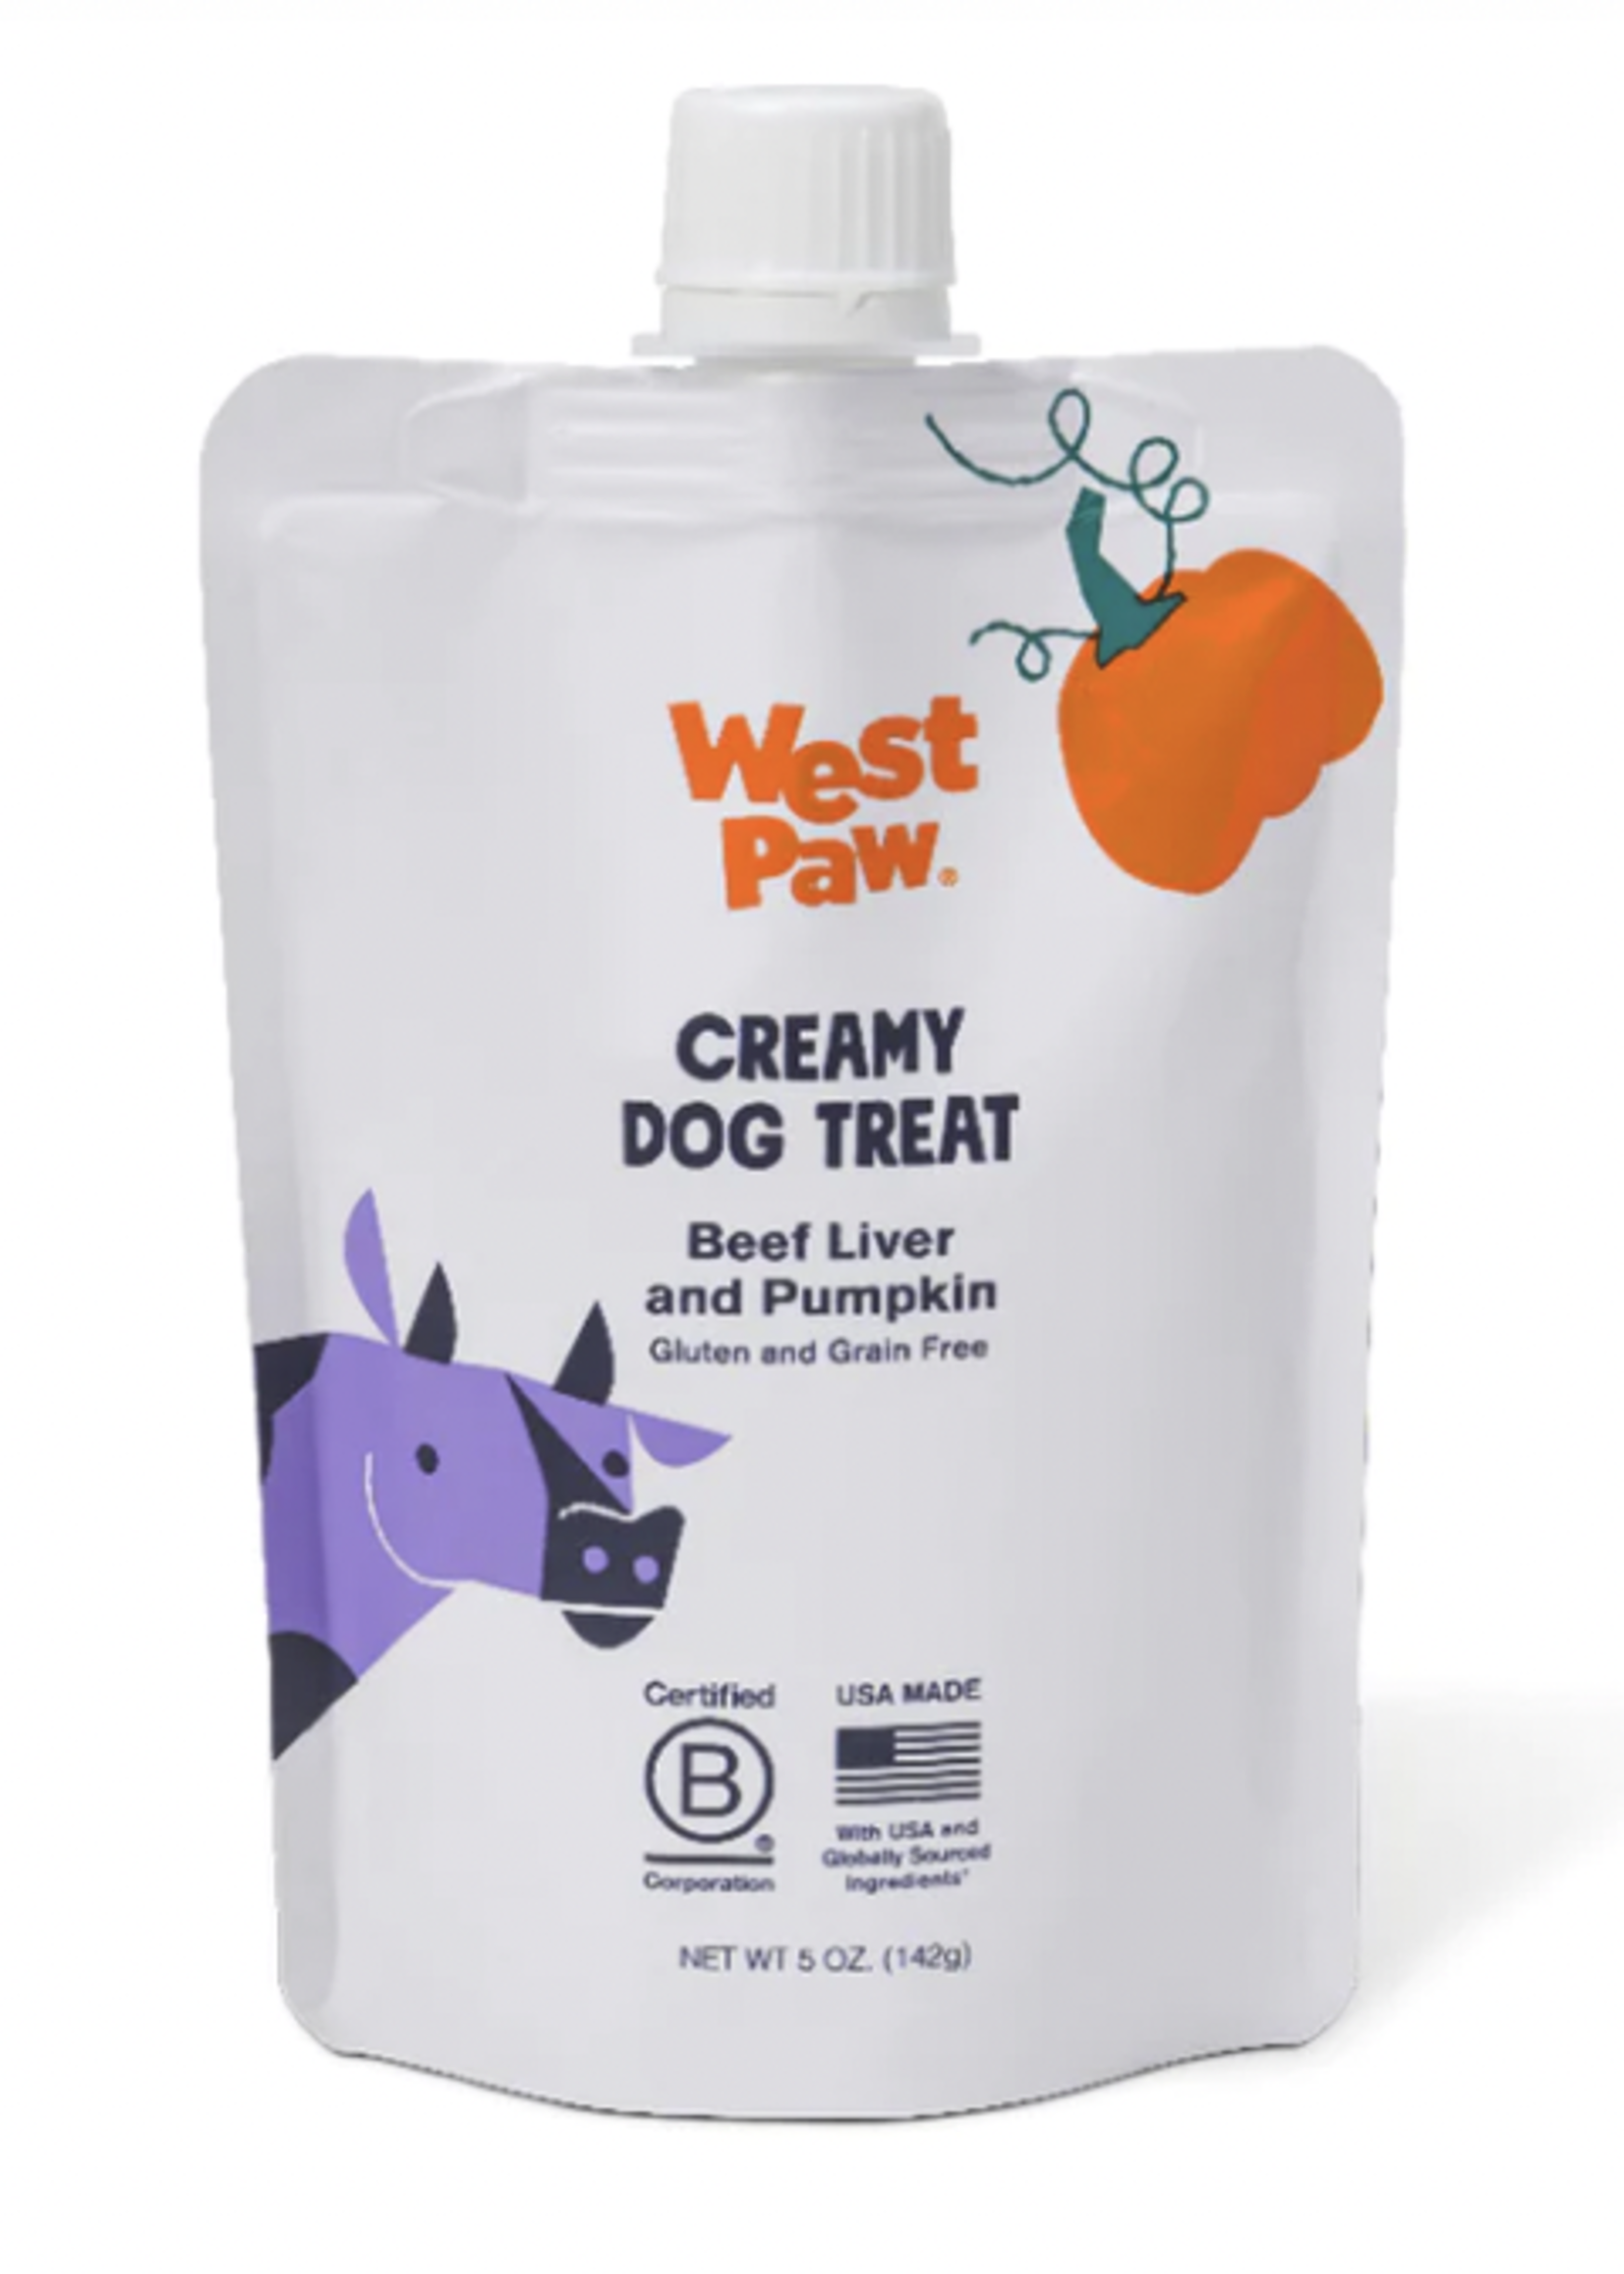 West Paw Beef Liver And Pumpkin Creamy Treat